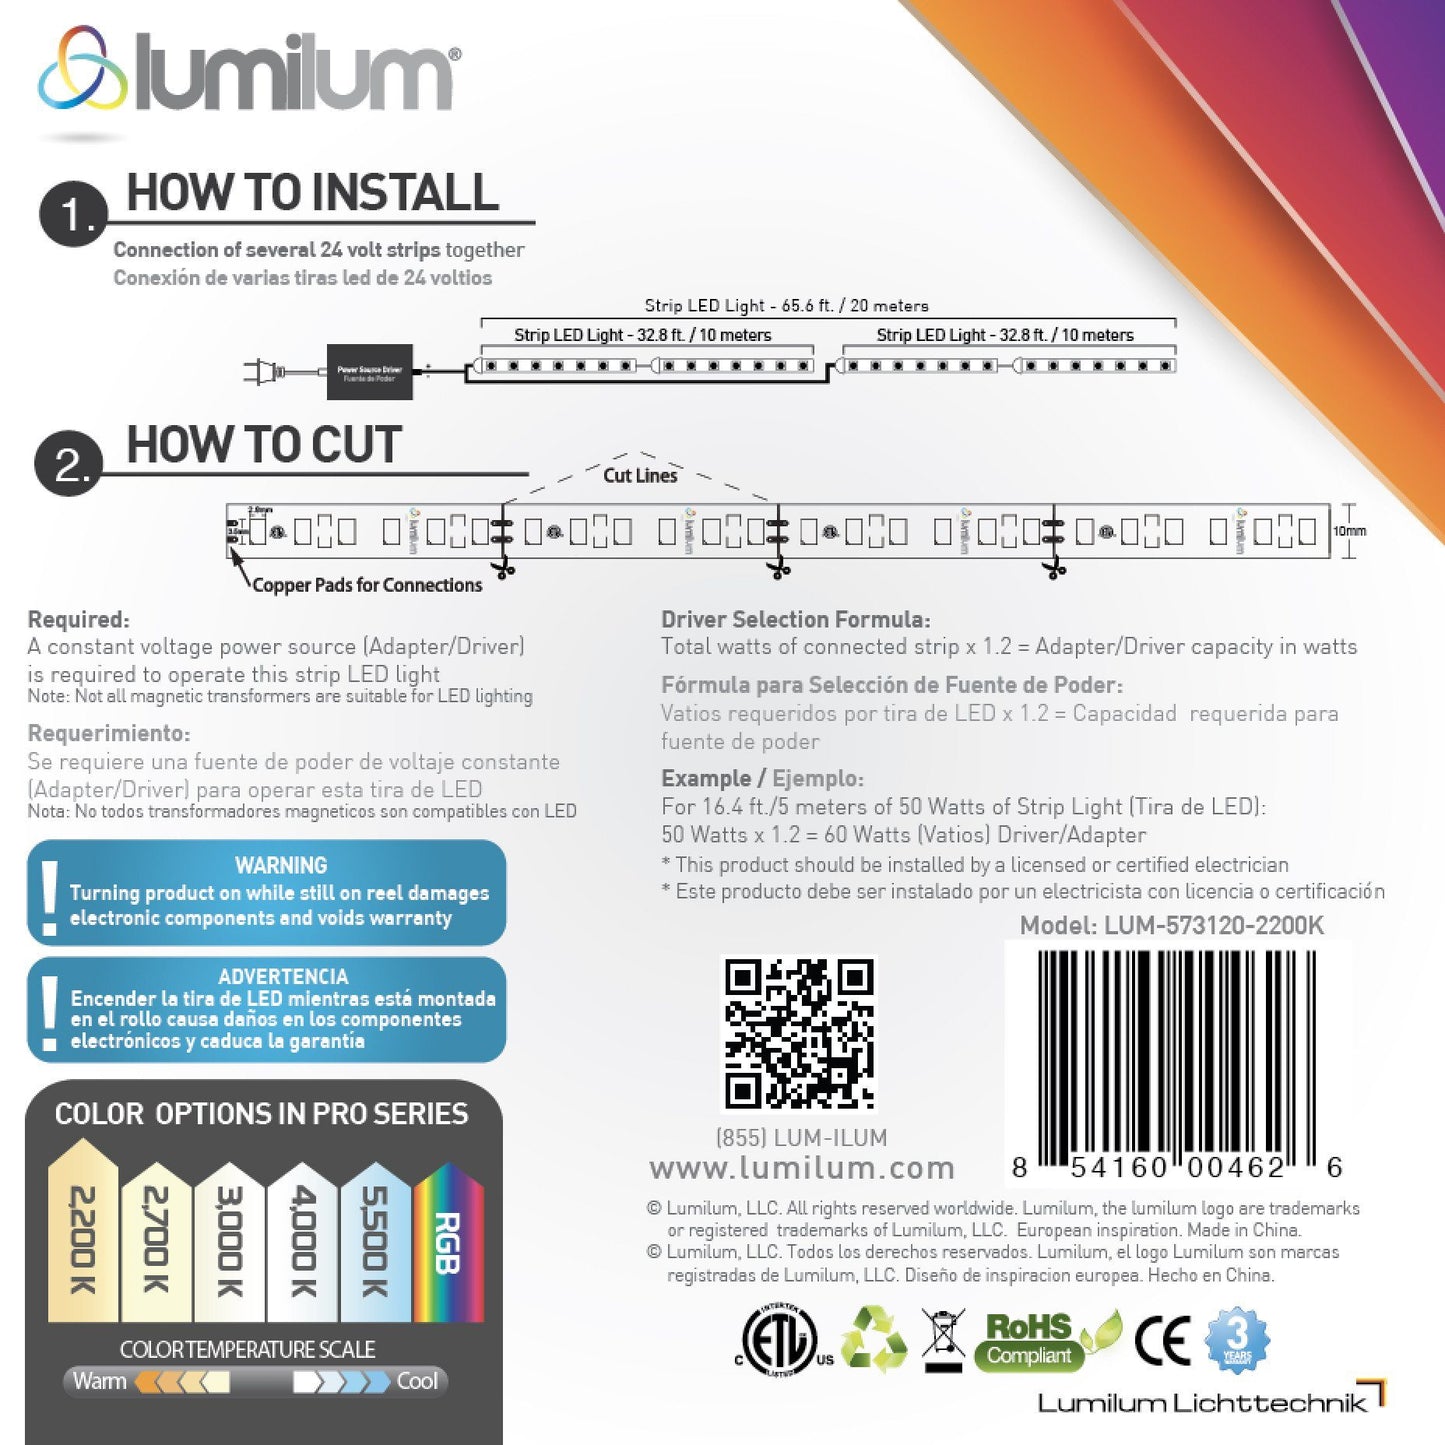 lumilum led strip light box backside showing installation instructions, how to cut, color temperature scale, qr code, and barcode with a variety of compliance icons at bottom right